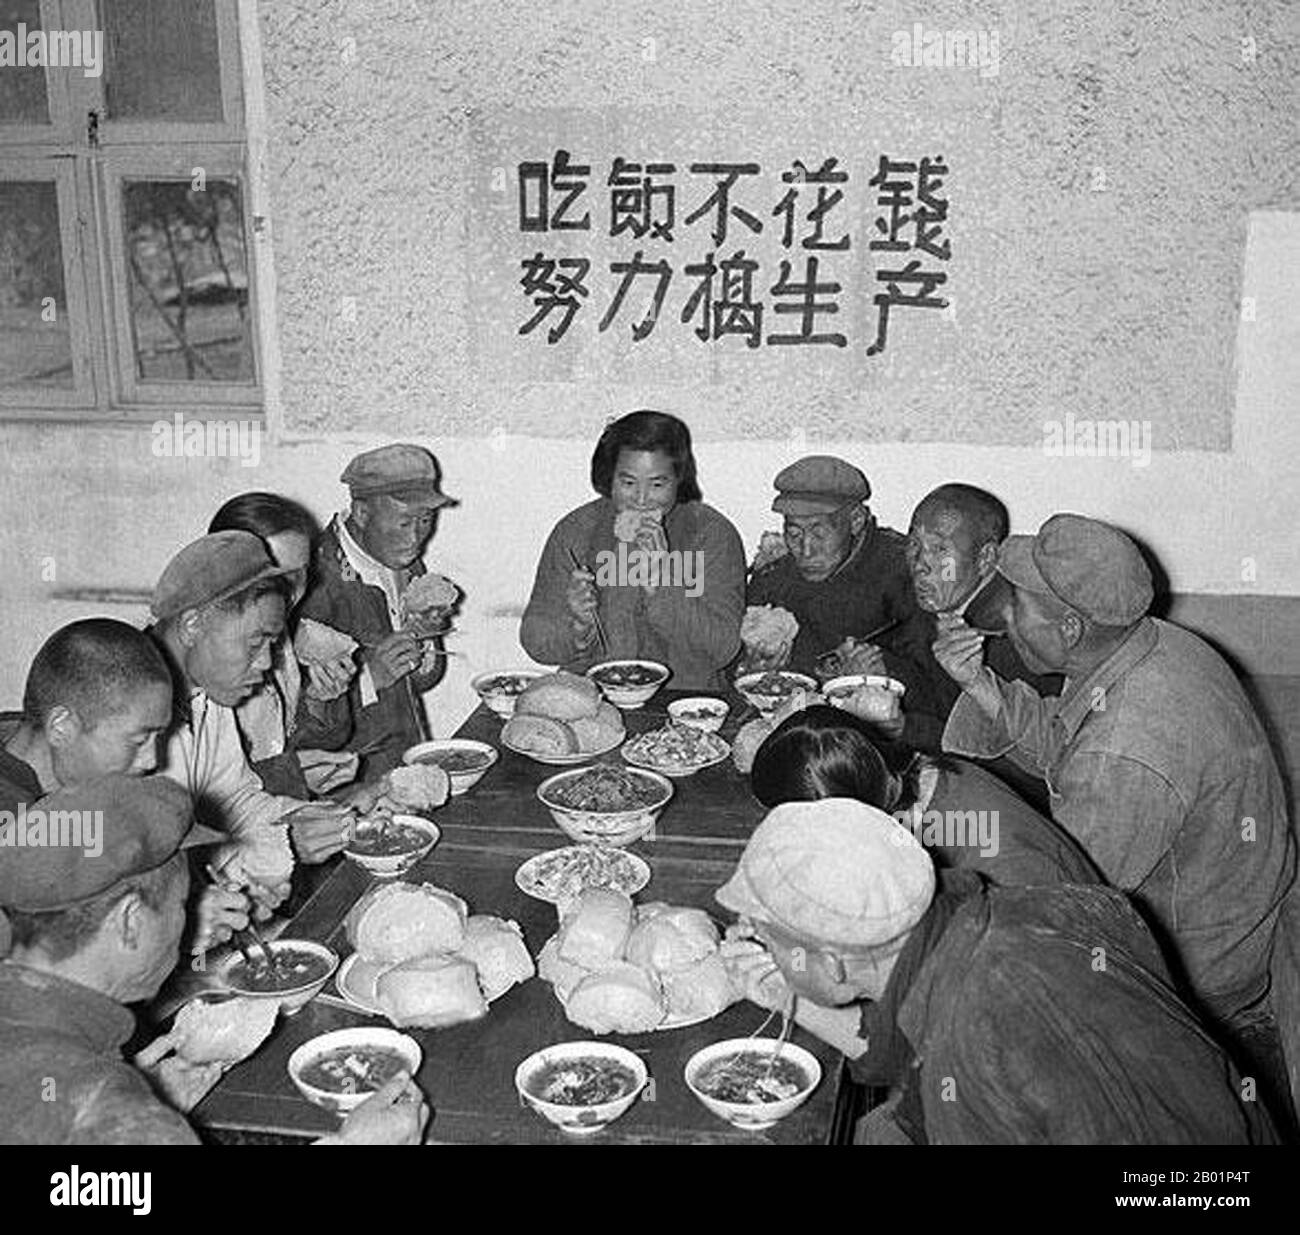 China: Rural workers eating in a free-for-all communal dining hall during the Great Leap Forward (1958-1961), 1958.  The Great Leap Forward of the People's Republic of China (PRC) was an economic and social campaign of the Communist Party of China (CPC), reflected in planning decisions from 1958 to 1961, which aimed to use China's vast population to rapidly transform the country from an agrarian economy into a modern communist society through the process of rapid industrialisation, and collectivisation. Mao Zedong led the campaign based on the Theory of Productive Forces. Stock Photo